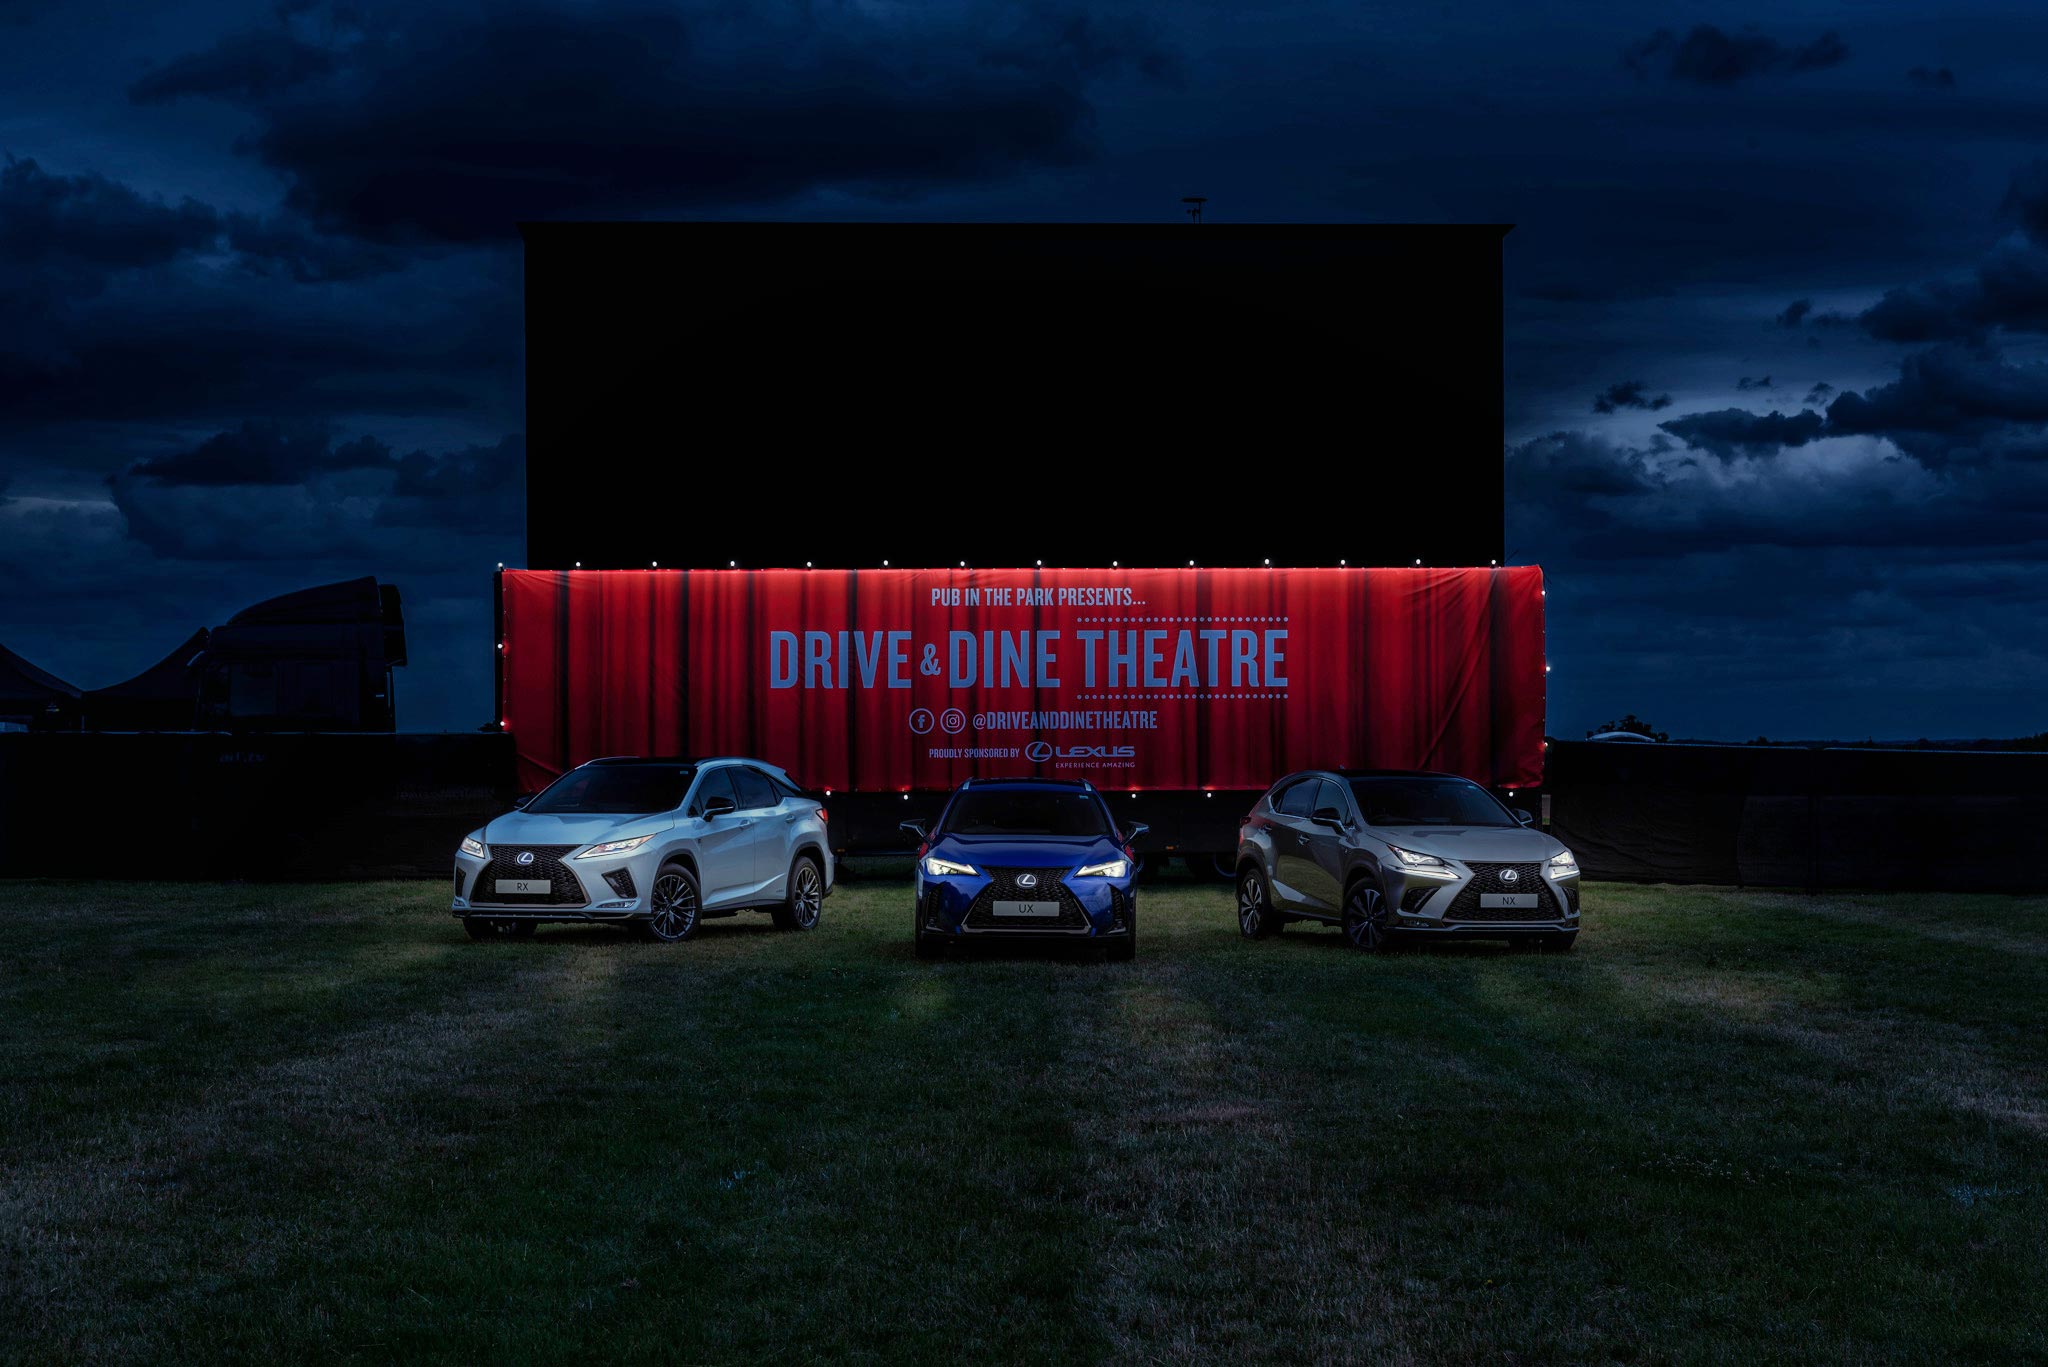 A promotional shot for a Lexus event, showcasing an open-air cinema premiere at night. Three Lexus cars are parked in front of a giant cinema screen with a large red curtain, creating a captivating atmosphere with headlights illuminating the dusk scene.